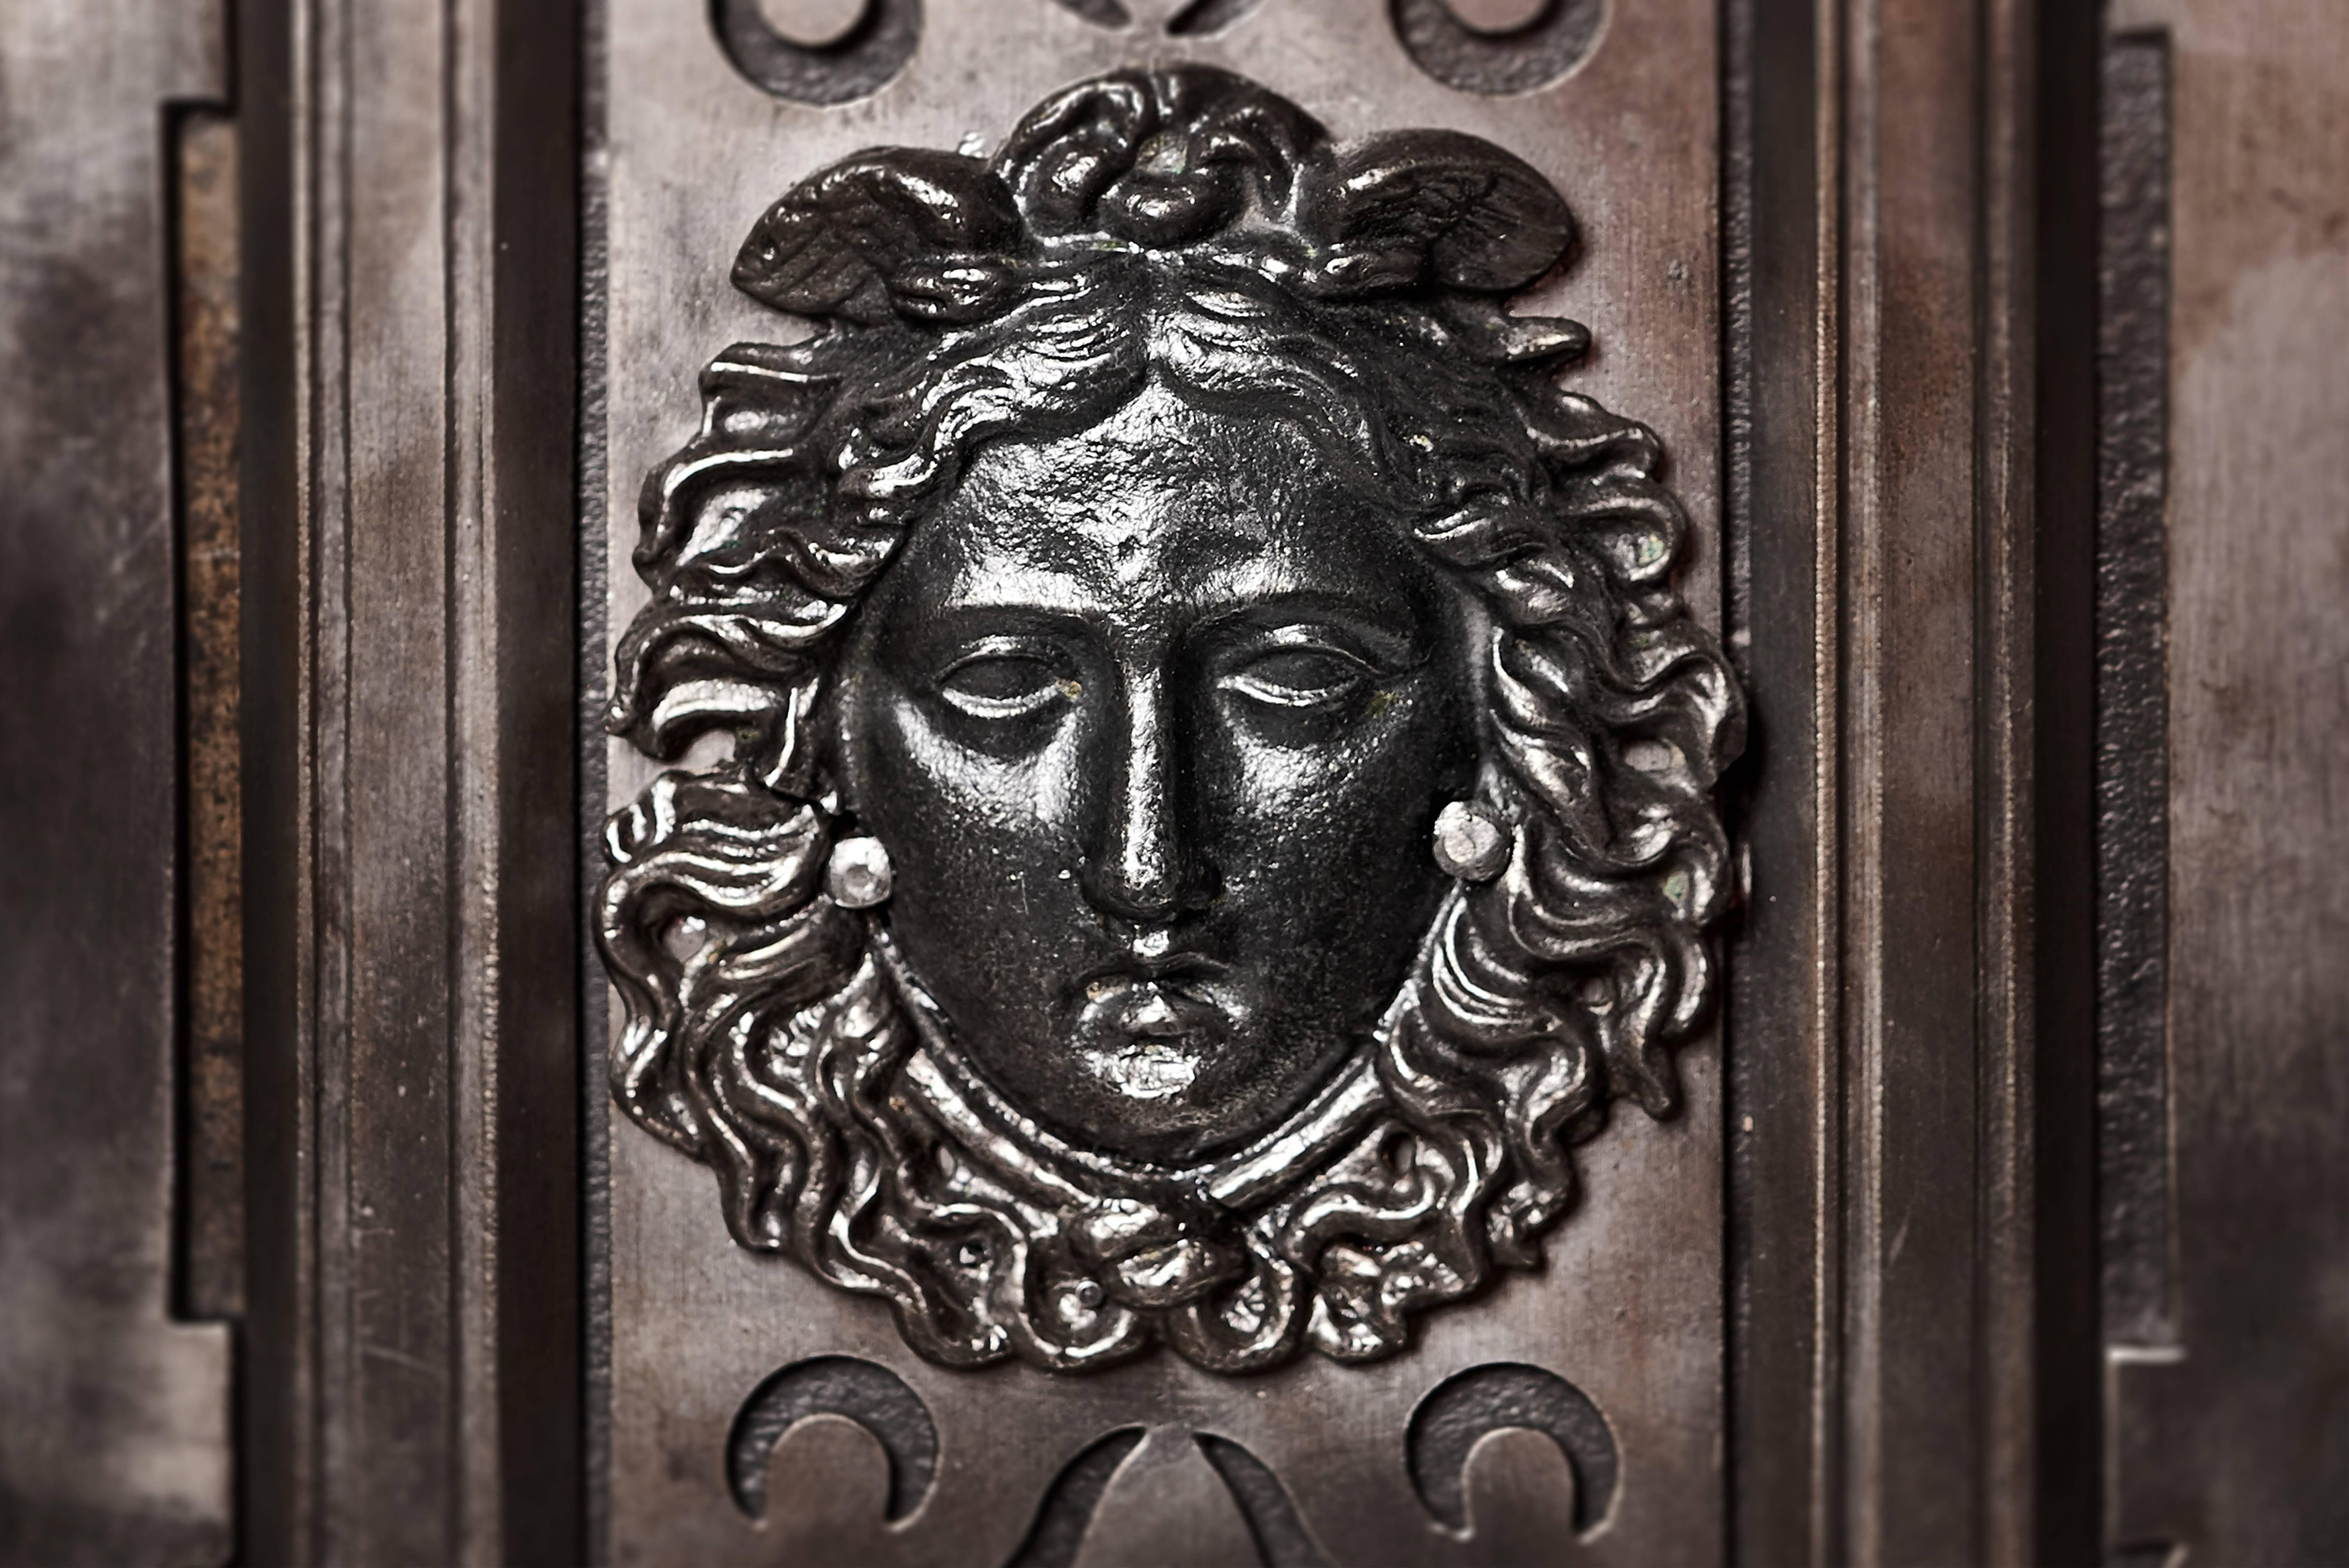 Northern Italian safe, dated circa 1820-1830 from the Piedmont region with beautiful central facial decoration as well as the typical hobnails. The safe and the keys are beautiful examples of late 18th-early 19th century Italian master blacksmith